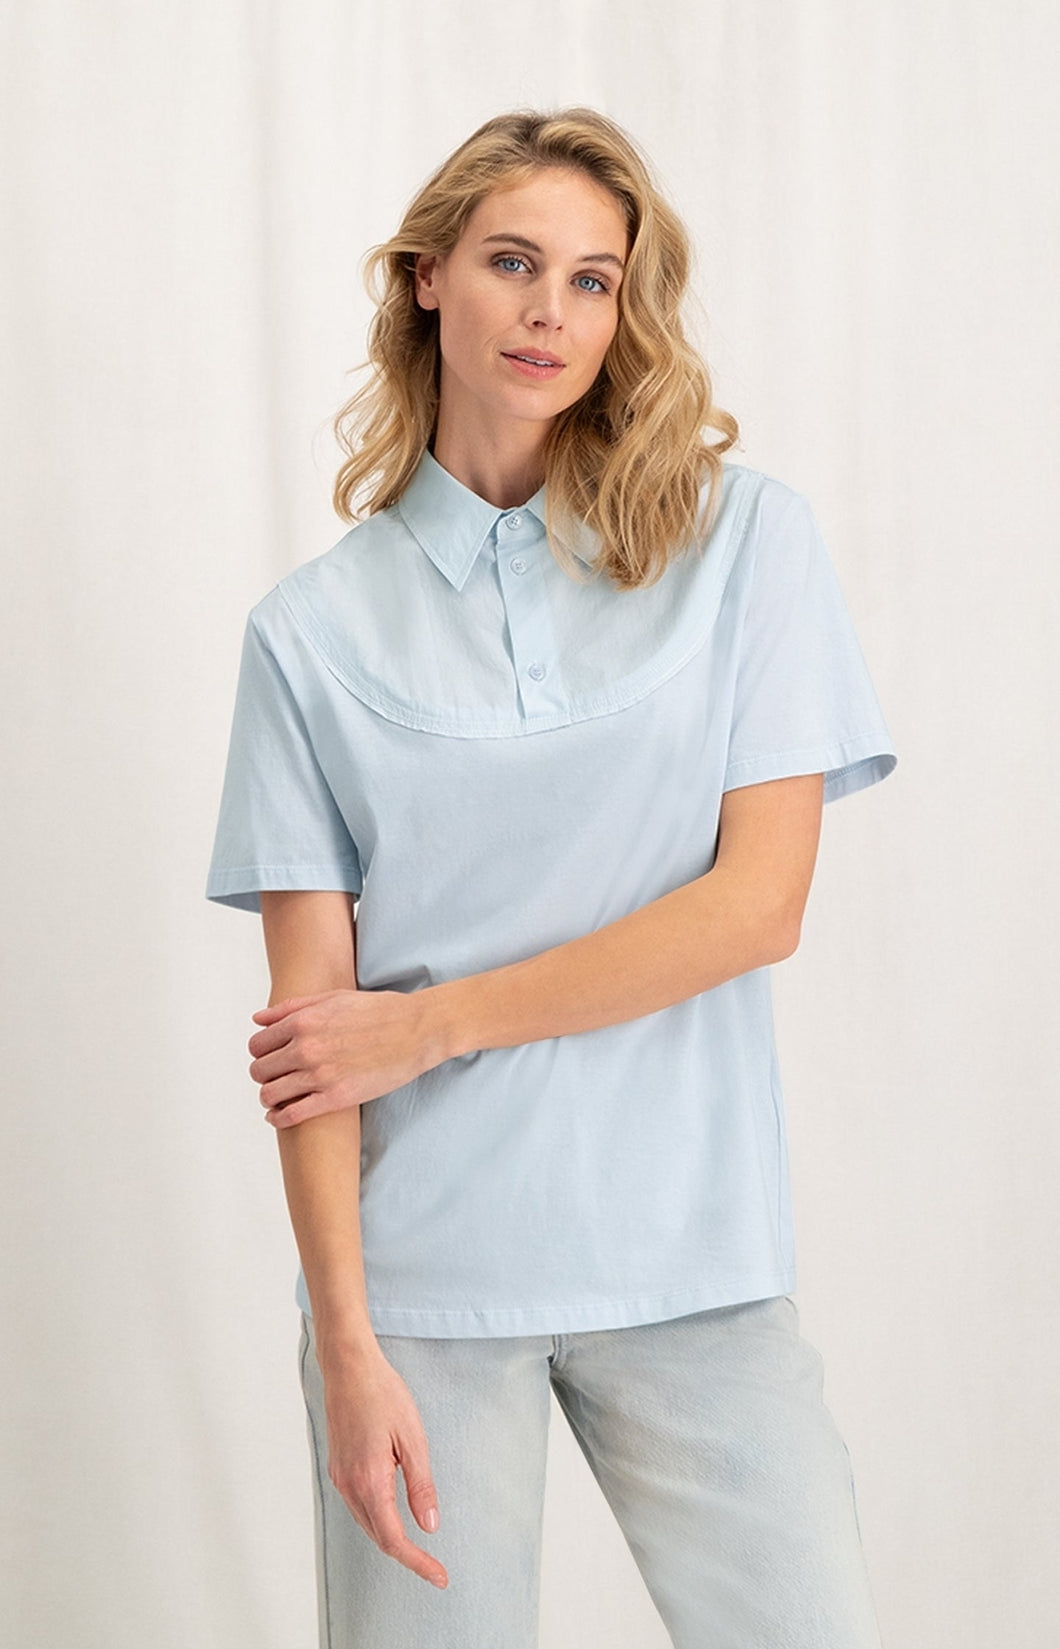 Jersey top with woven shirt collar, short sleeves and button